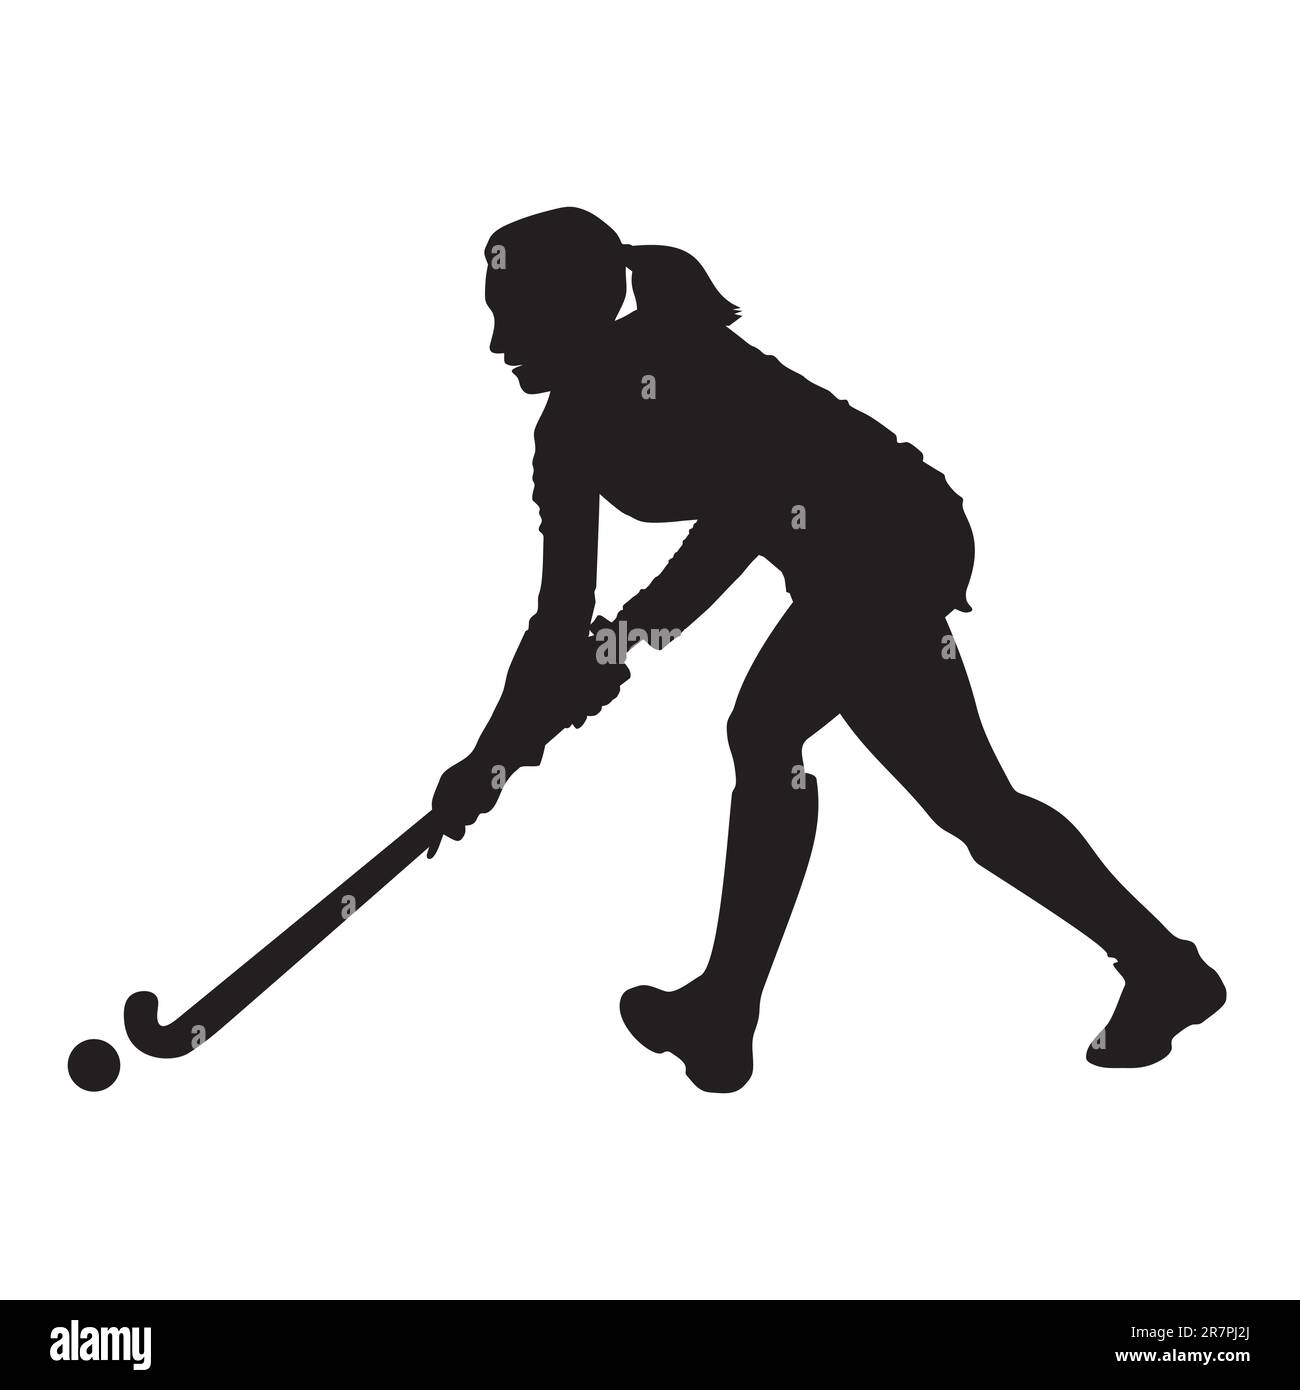 Field hockey competitive game and equipment Vector Image